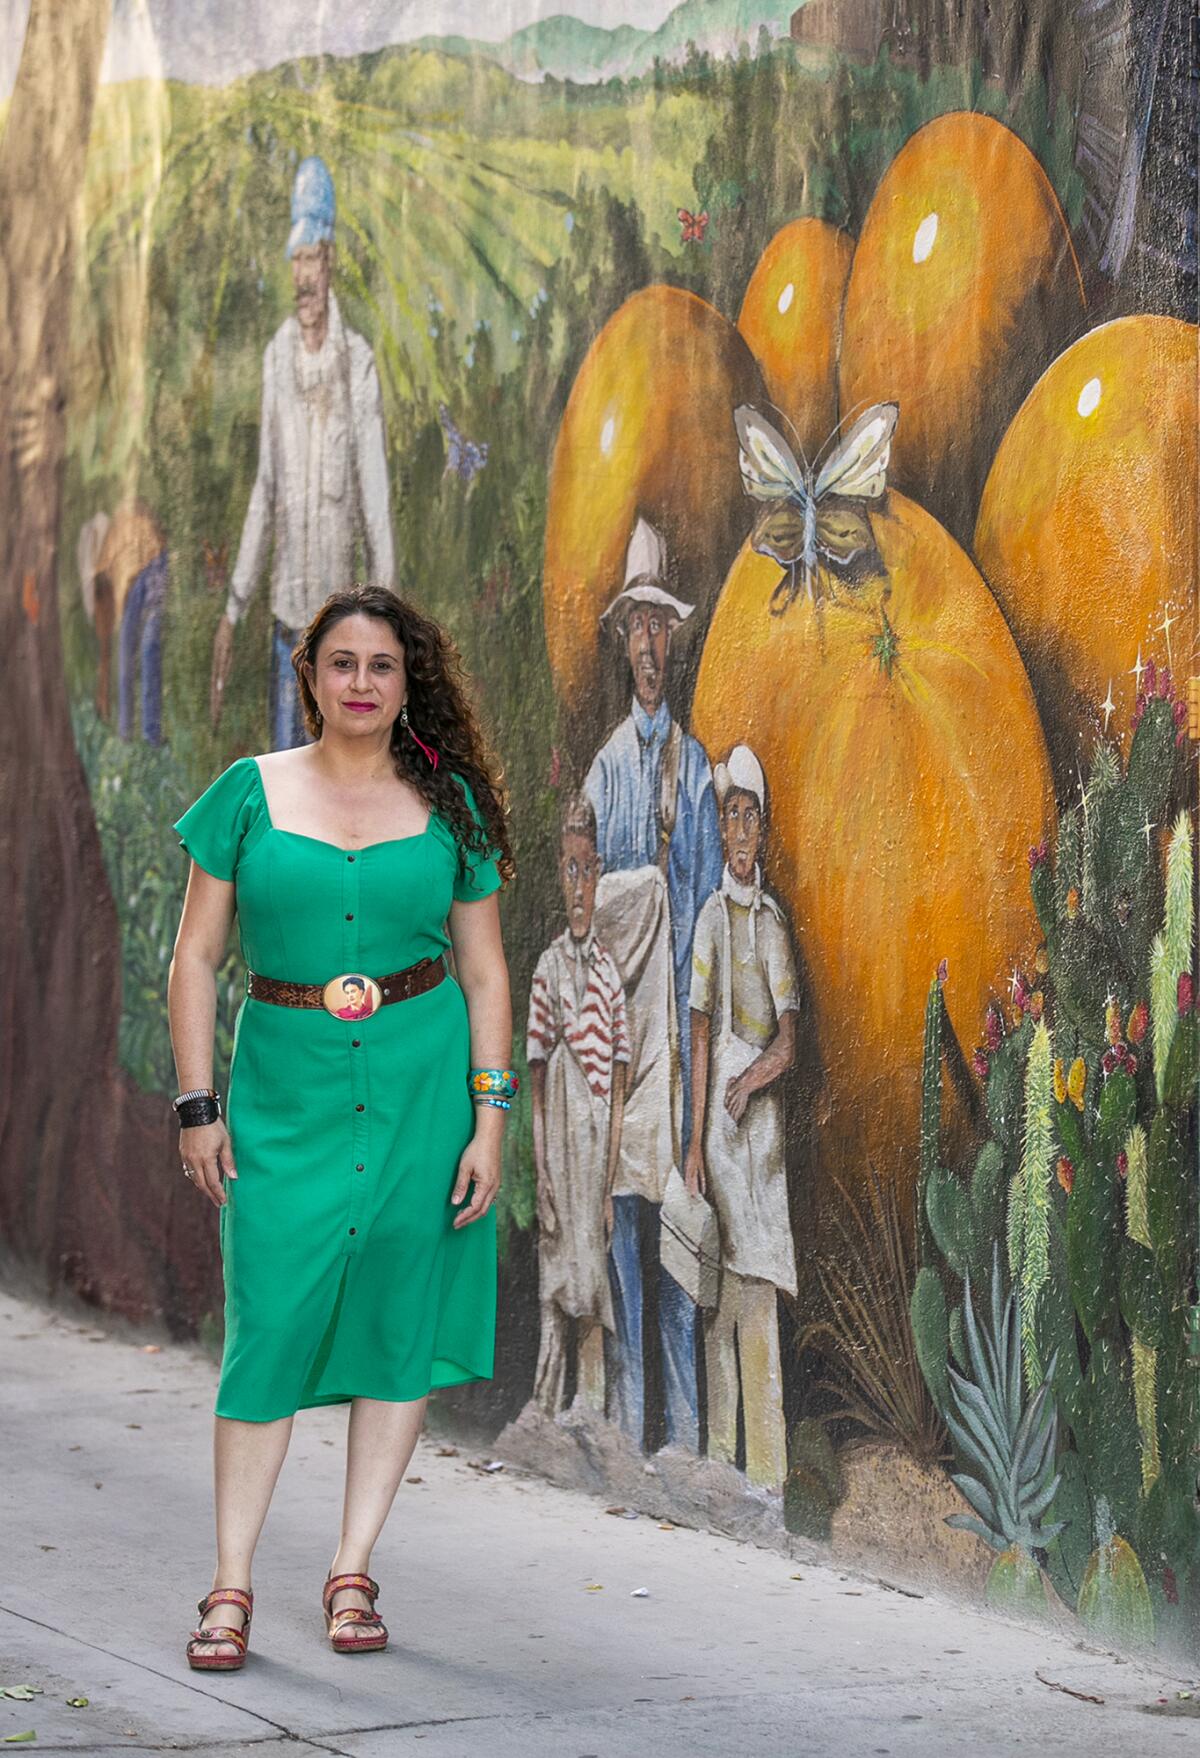 Rojas poses in Santa Ana's art alley, a mural project she led.